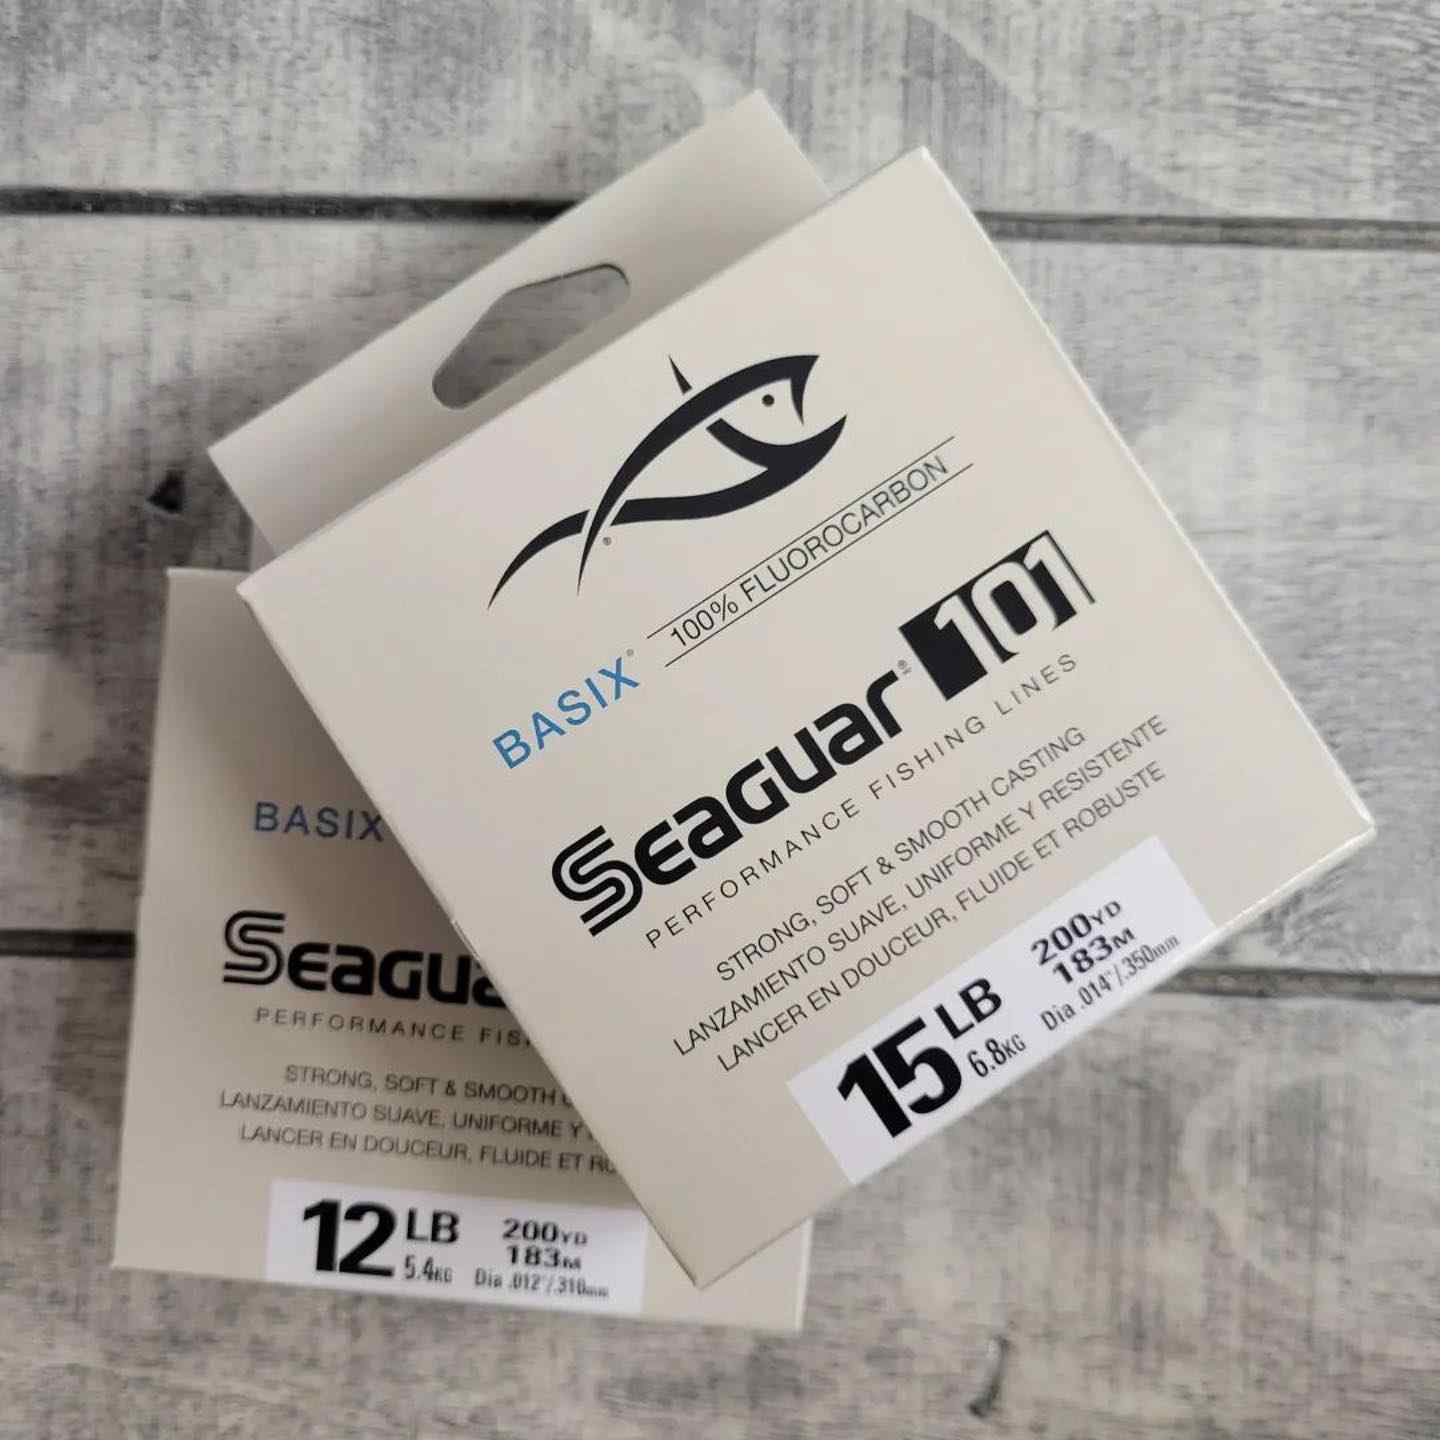 Seaguar BasiX - Have you tried it lately? - Fishing Rods, Reels, Line, and  Knots - Bass Fishing Forums